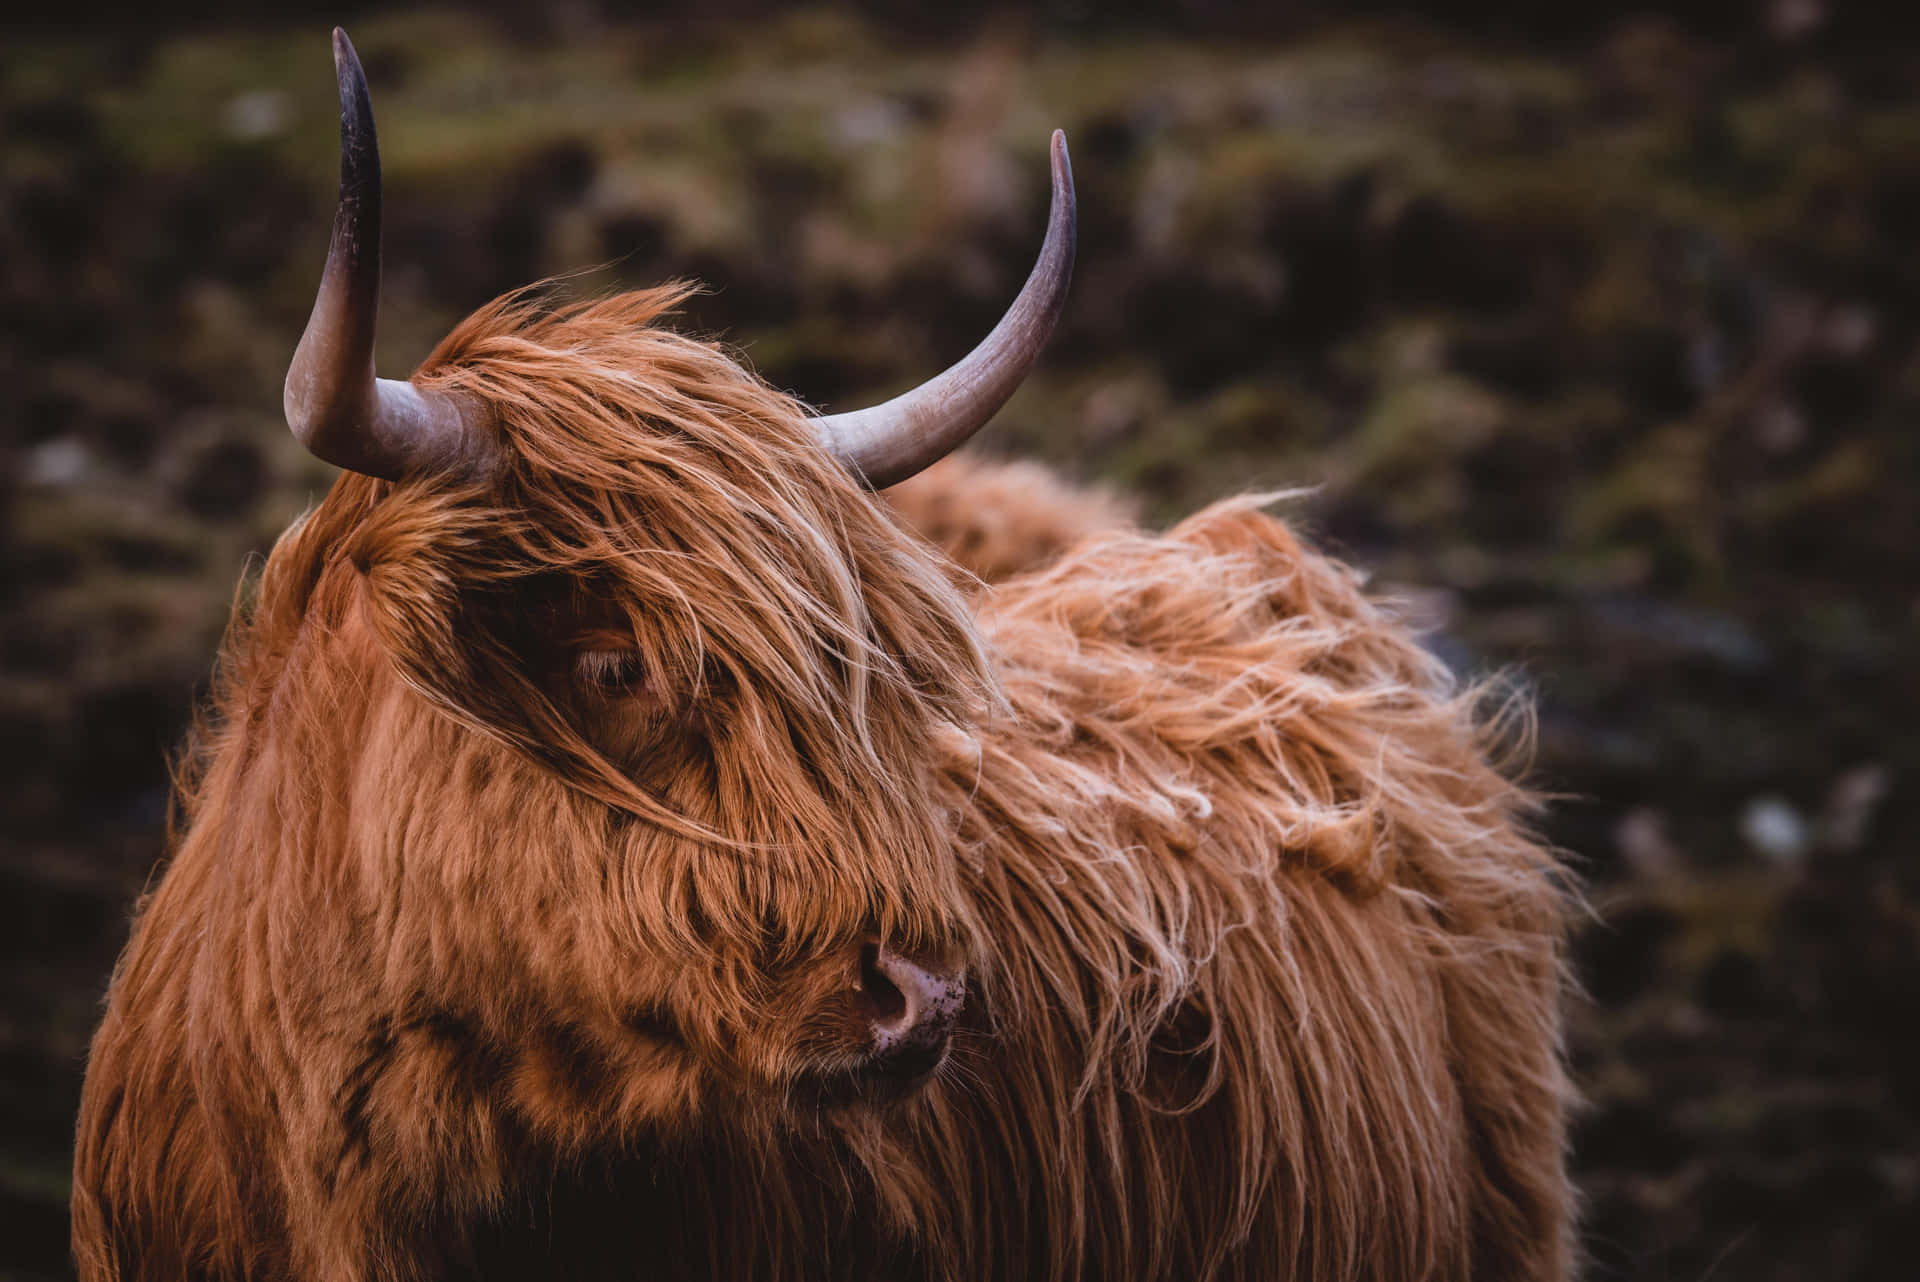 Caption: Majestic Highland Cow in the Countryside